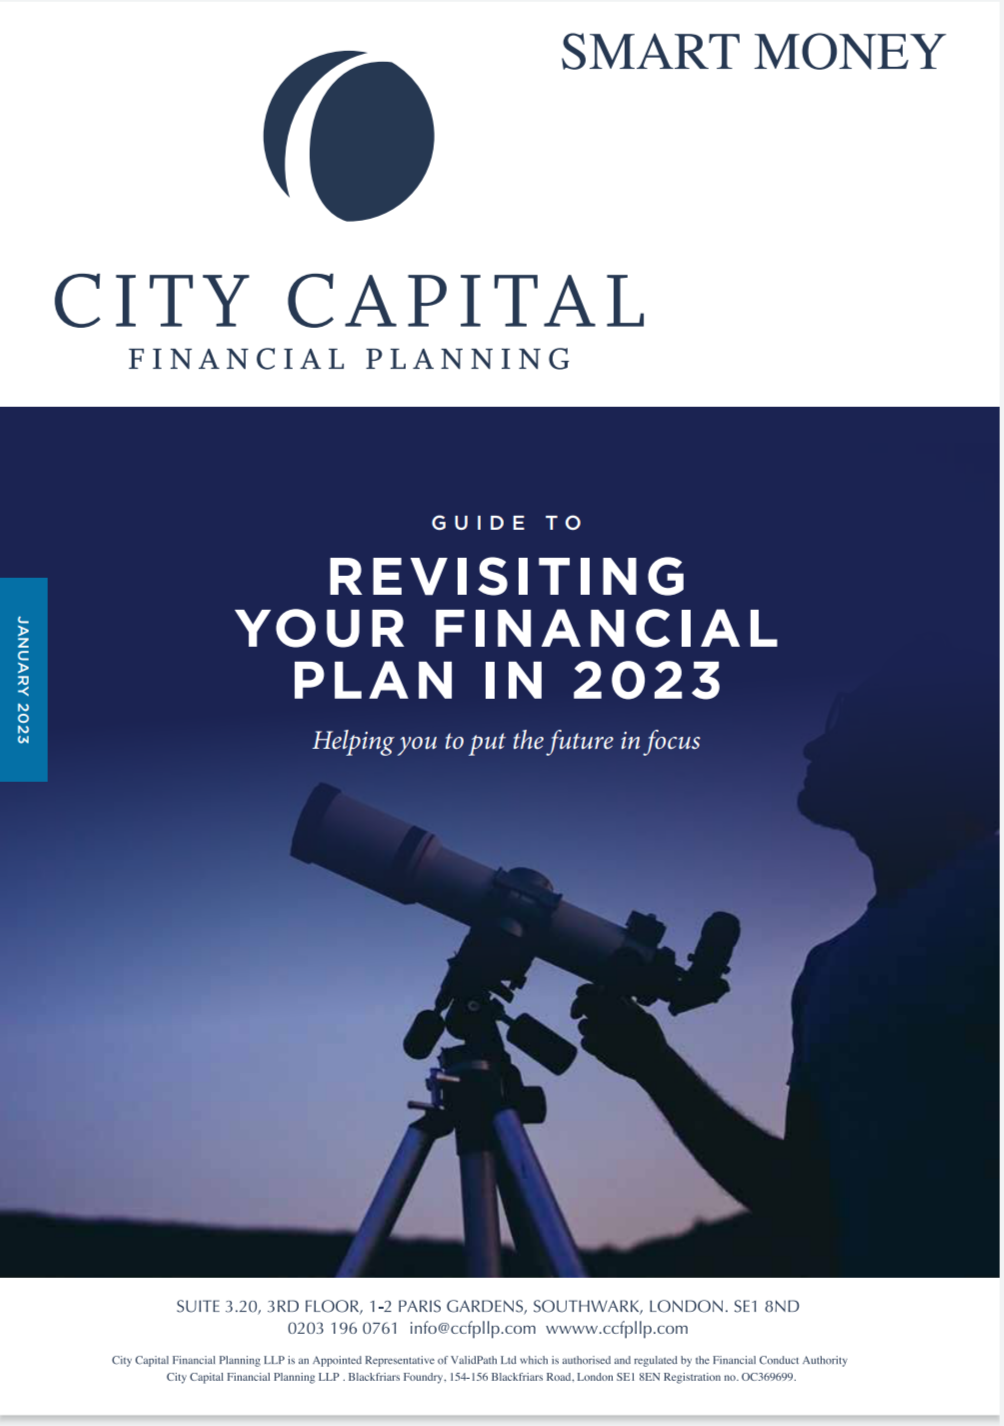 Guide to Revisiting your Financial Plan in 2023